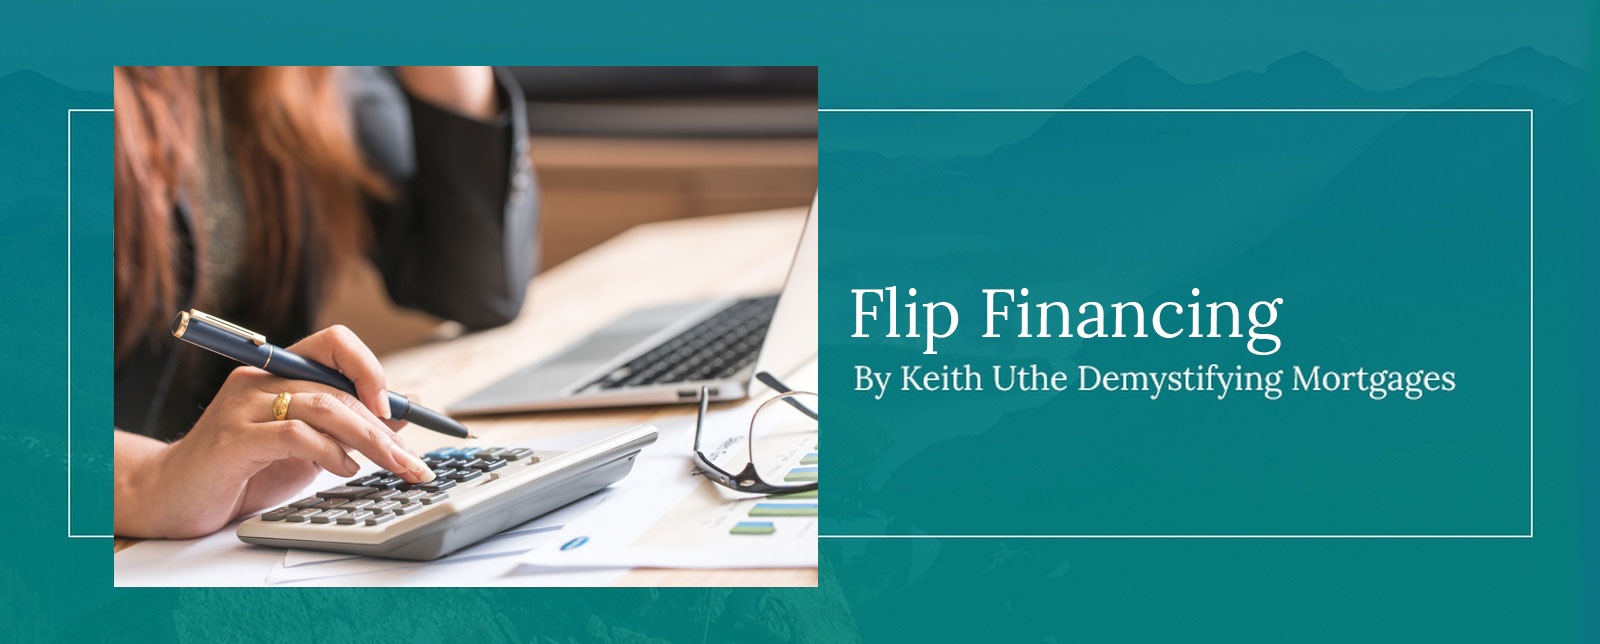 Flip Financing in Edmonton, Calgary, AB by Keith Uthe Demystifying Mortgages